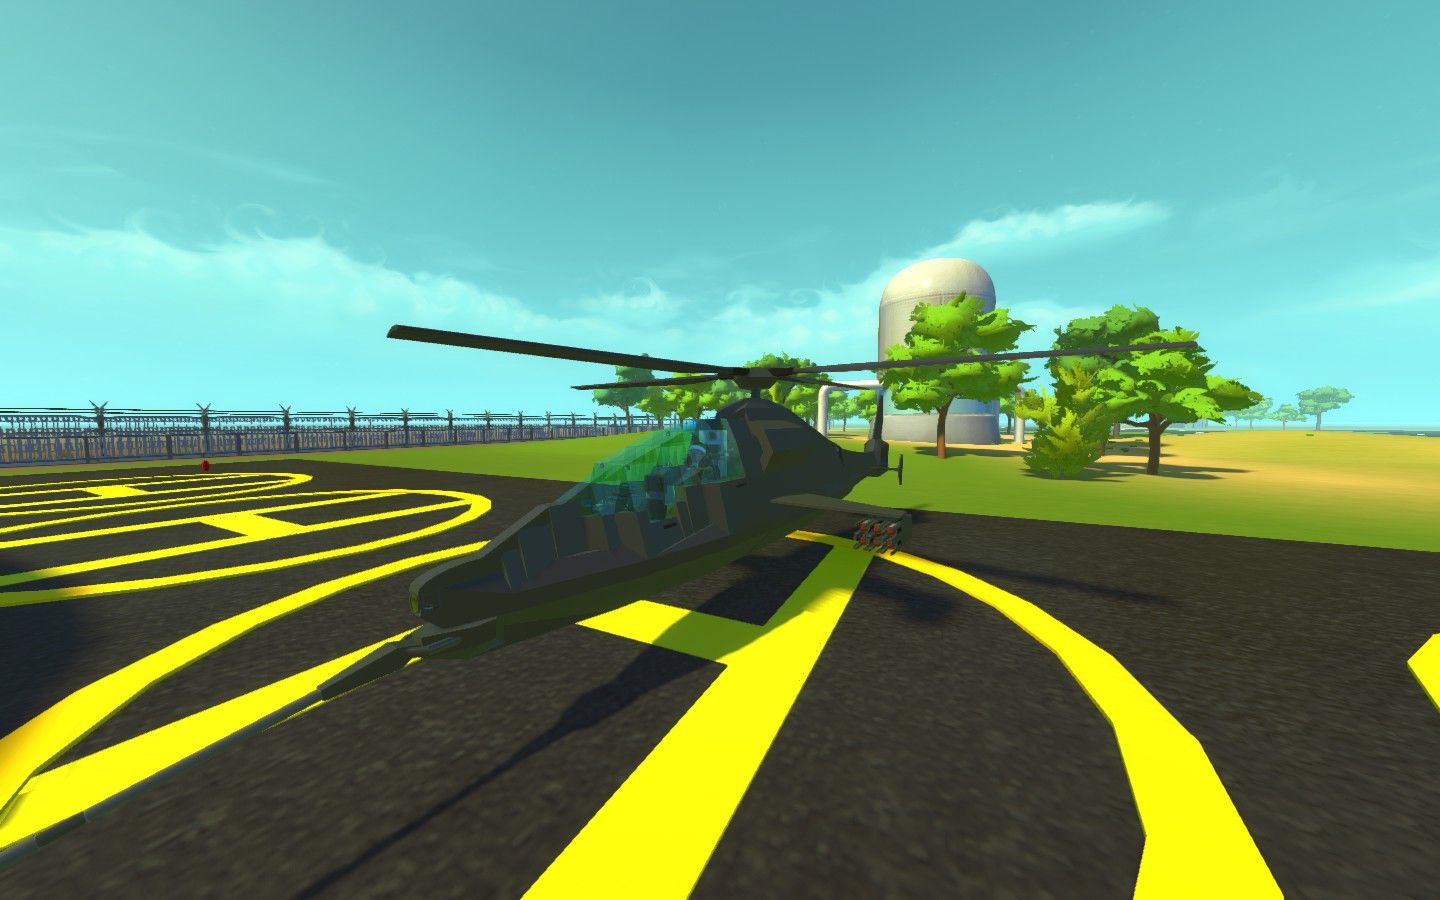 Made a stealth attack helicopter